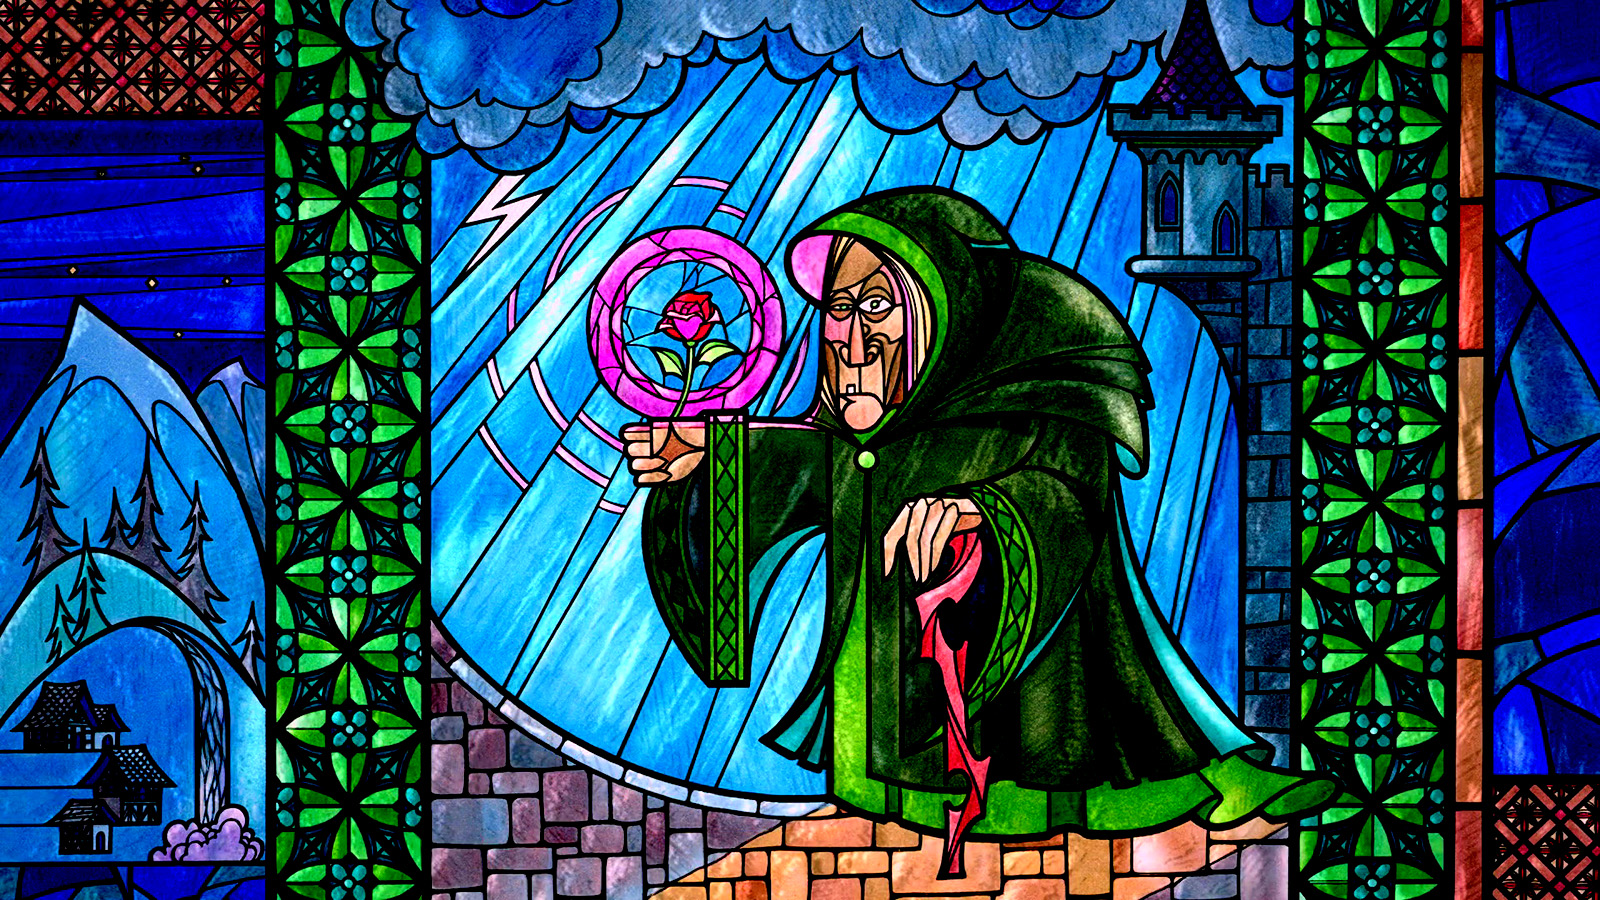 Stained Glass Wallpaper - Beauty And The Beast Stained Glass Movie - HD Wallpaper 